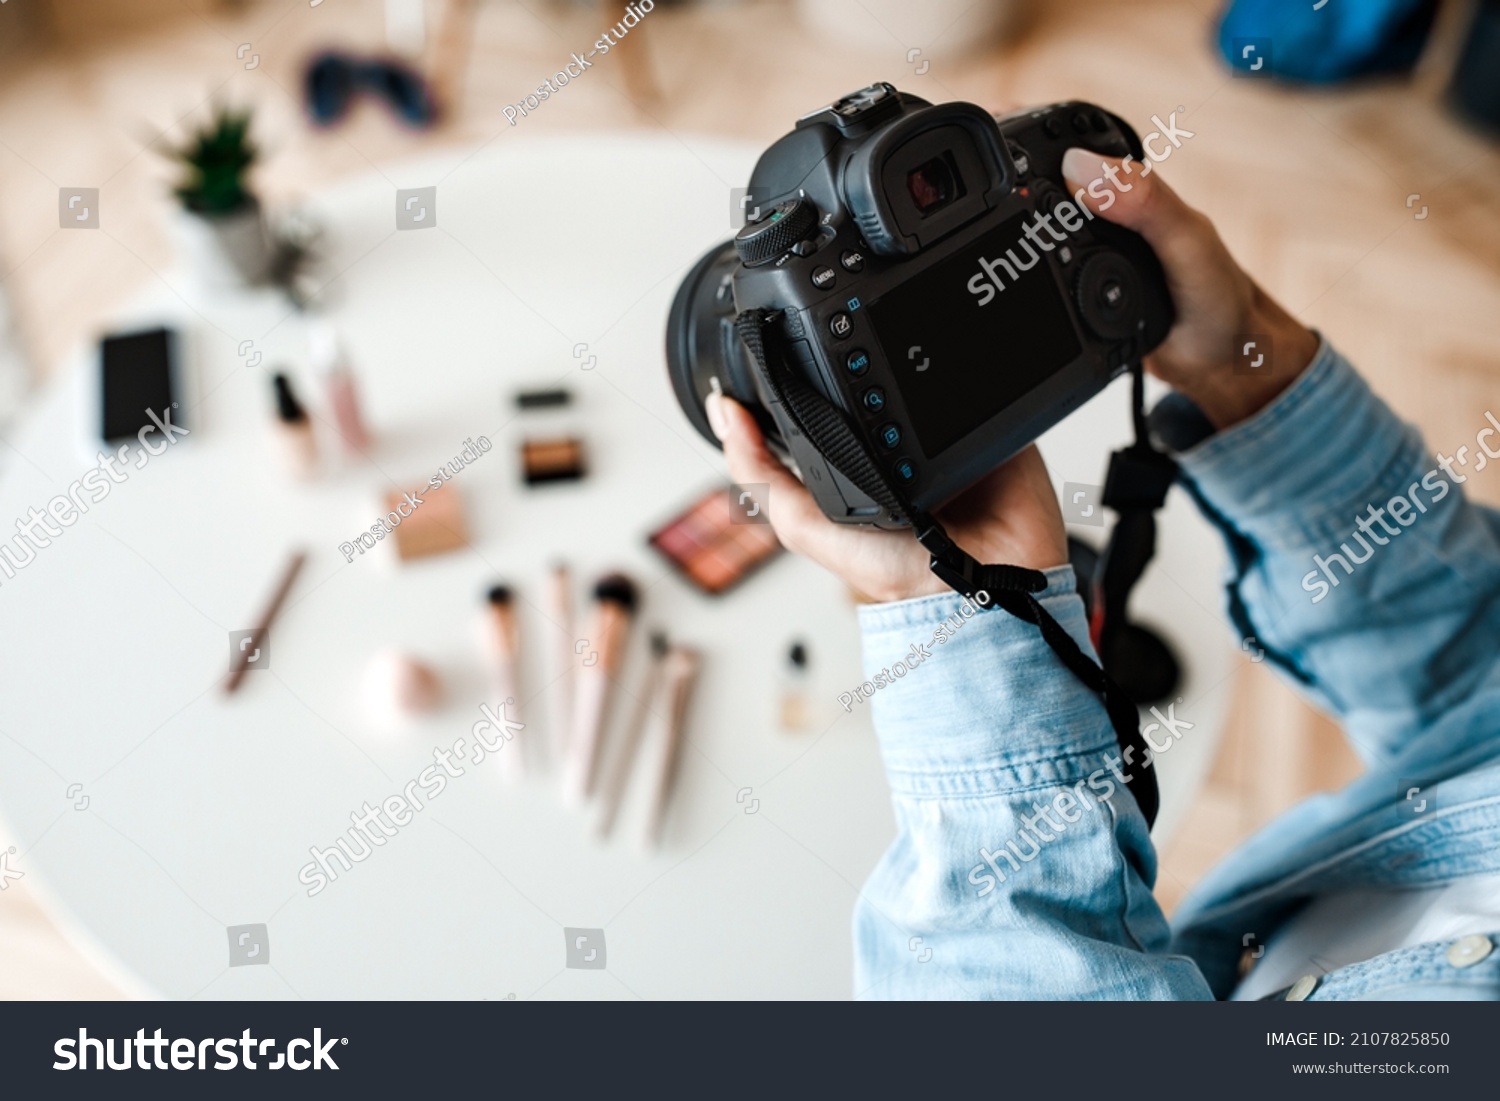 Object Photography. Unrecognizable Female Photographer Taking Photo Of Cosmetic Products On Desktop, Closeup Of Hands Holding Camera Indoors. Cropped, Selective Focus #2107825850